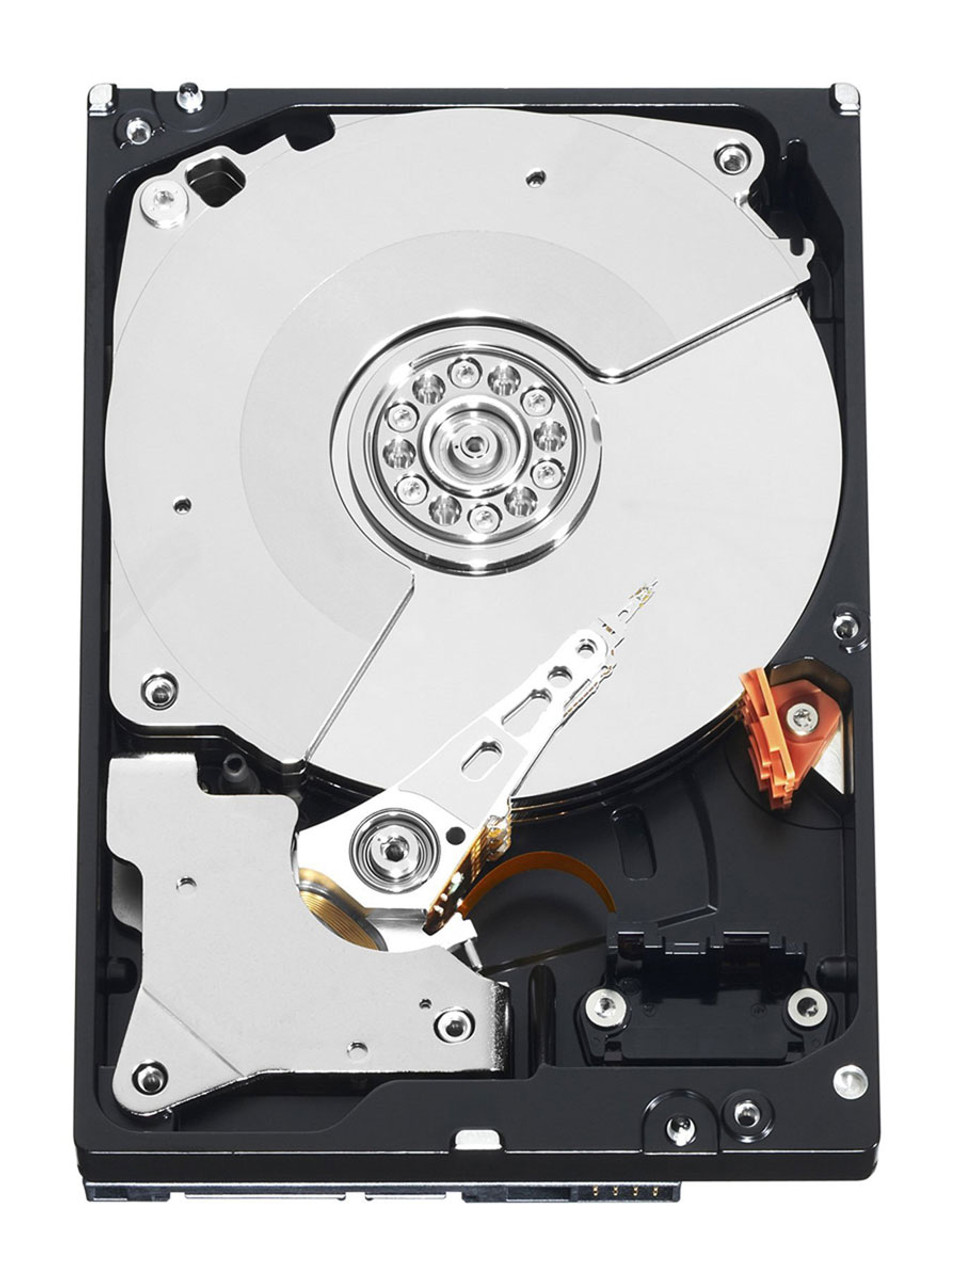 C5716-06 Dell 73GB 10000RPM Ultra-320 SCSI 80-Pin Hot Swap 8MB Cache 3.5-inch Internal Hard Drive with Tray